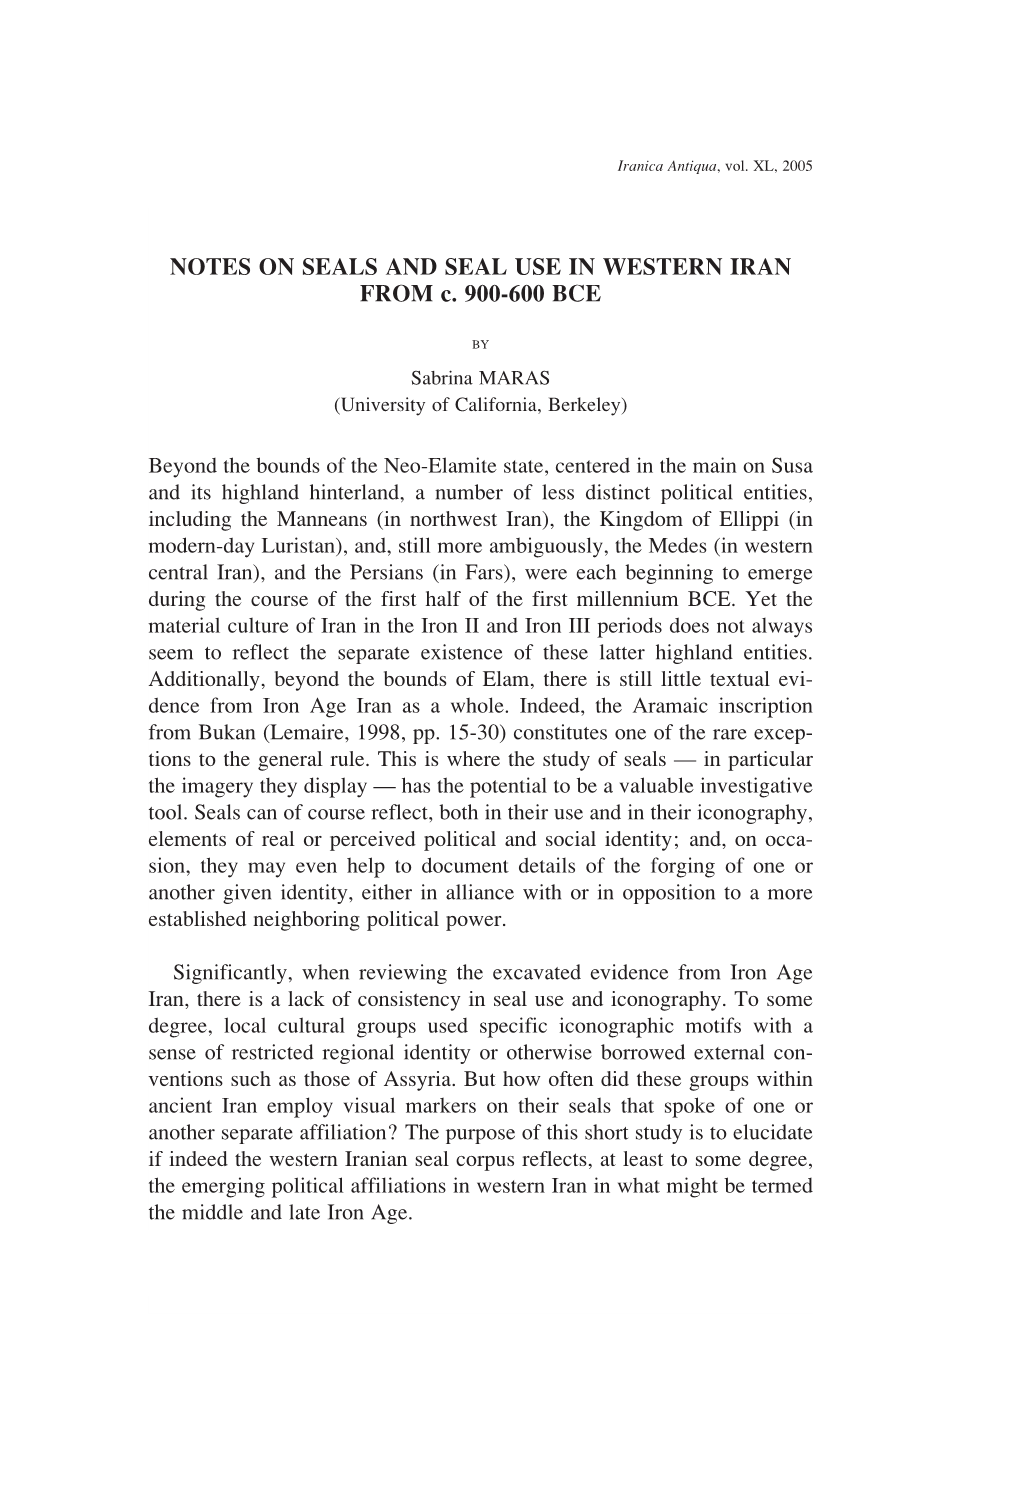 NOTES on SEALS and SEAL USE in WESTERN IRAN from C. 900-600 BCE